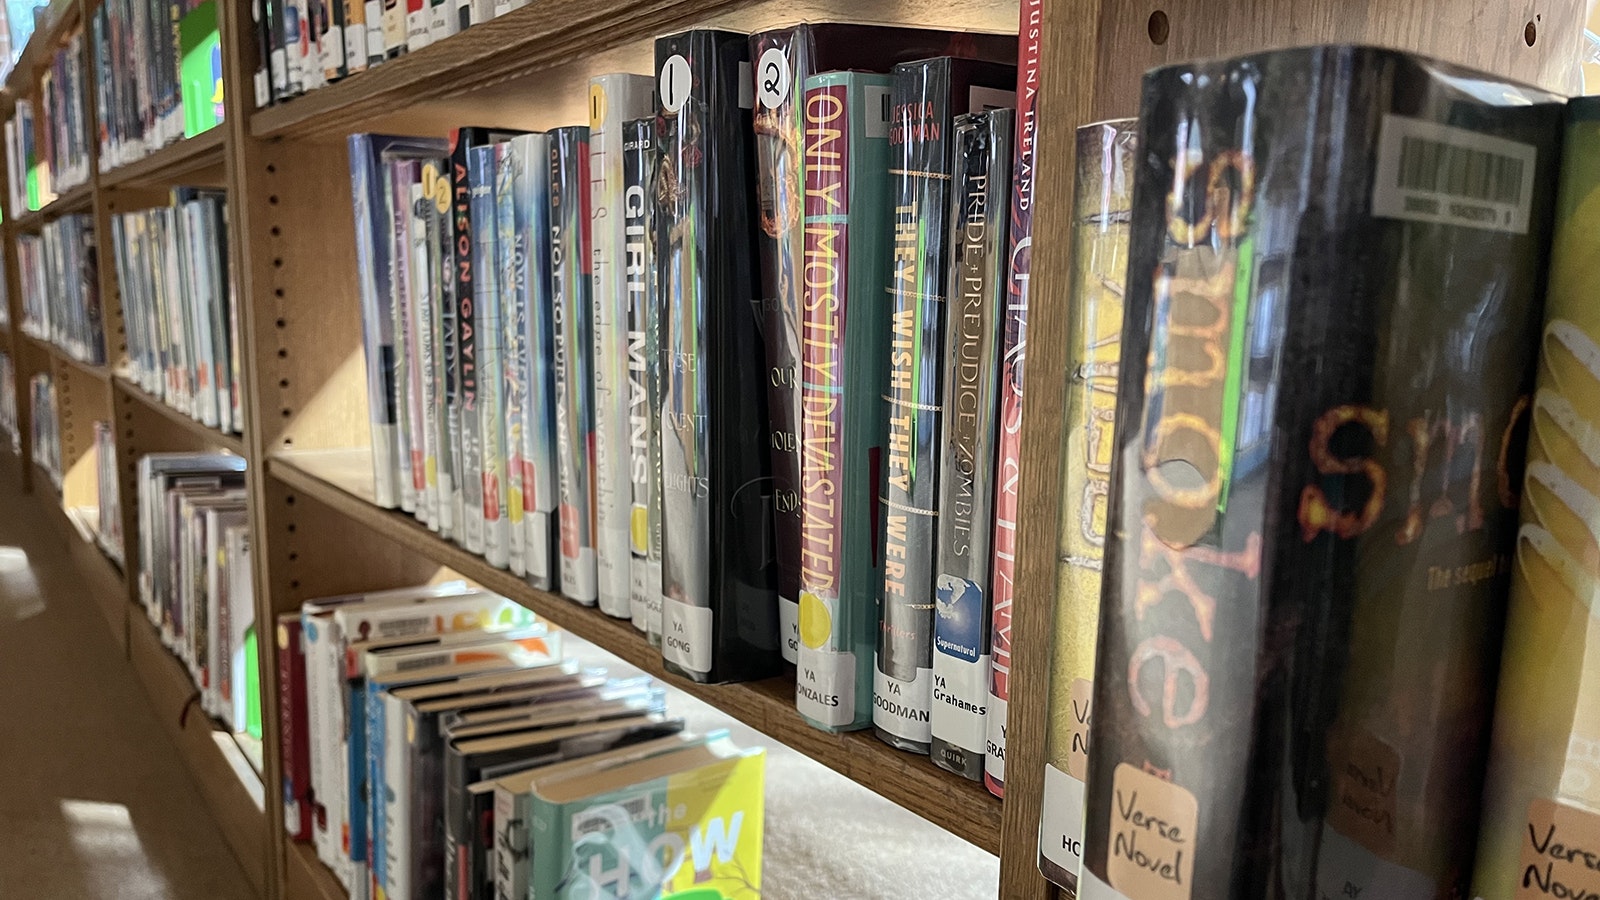 "Smoke" by Ellen Hopkins is one of two books in the young-adult section of the Fremont County Library that's been challenged.